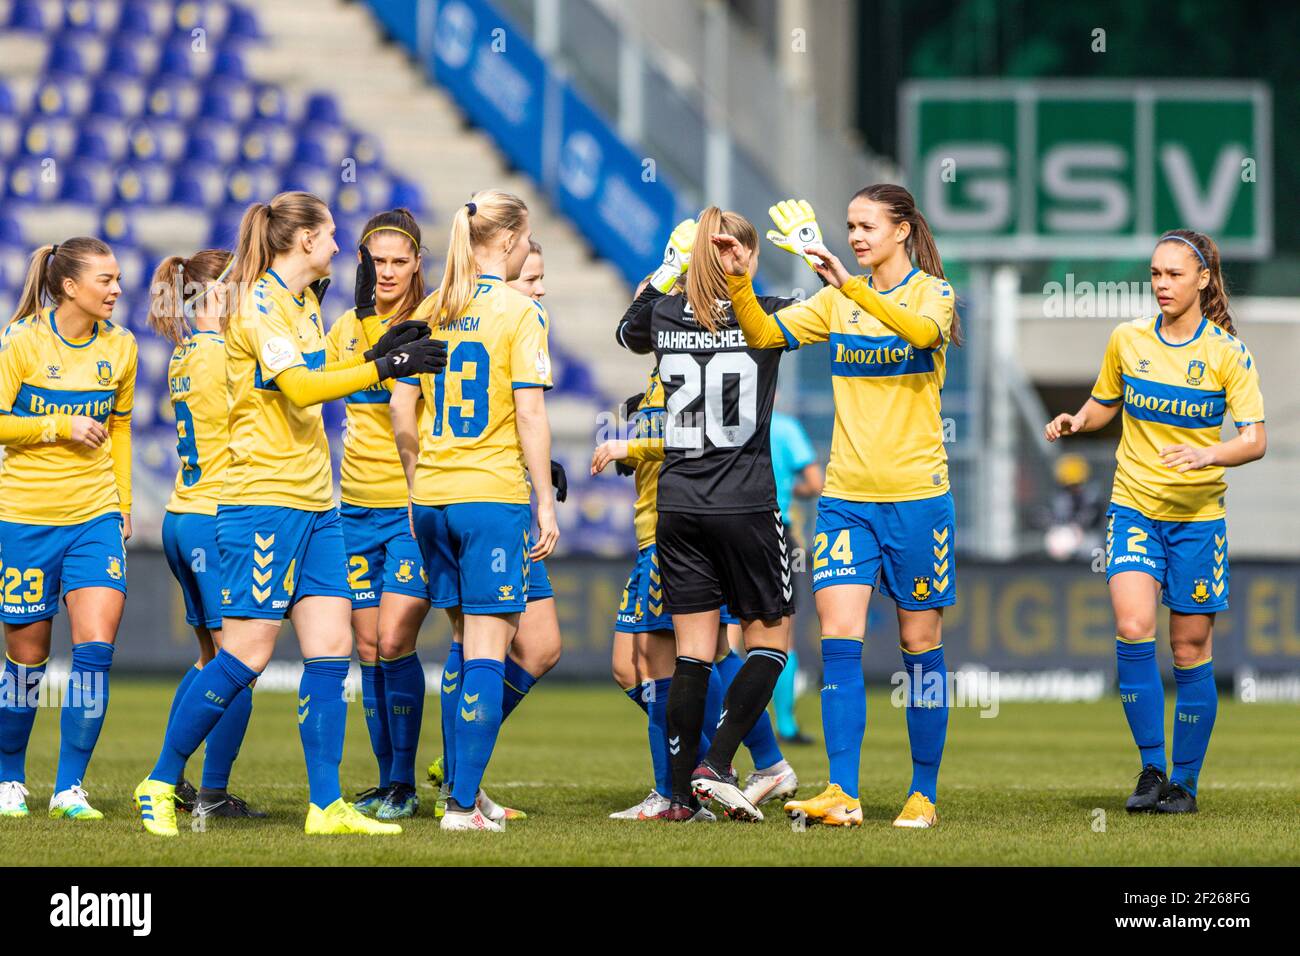 Brondby, Denmark. 10th Mar, 2021. Players of Brondby IF greeting eachother  before the UEFA Women's Champions League match between Brondby IF and  Olympique Lyon at Brondby Stadion in Broendby, Denmark. (Photo Credit: